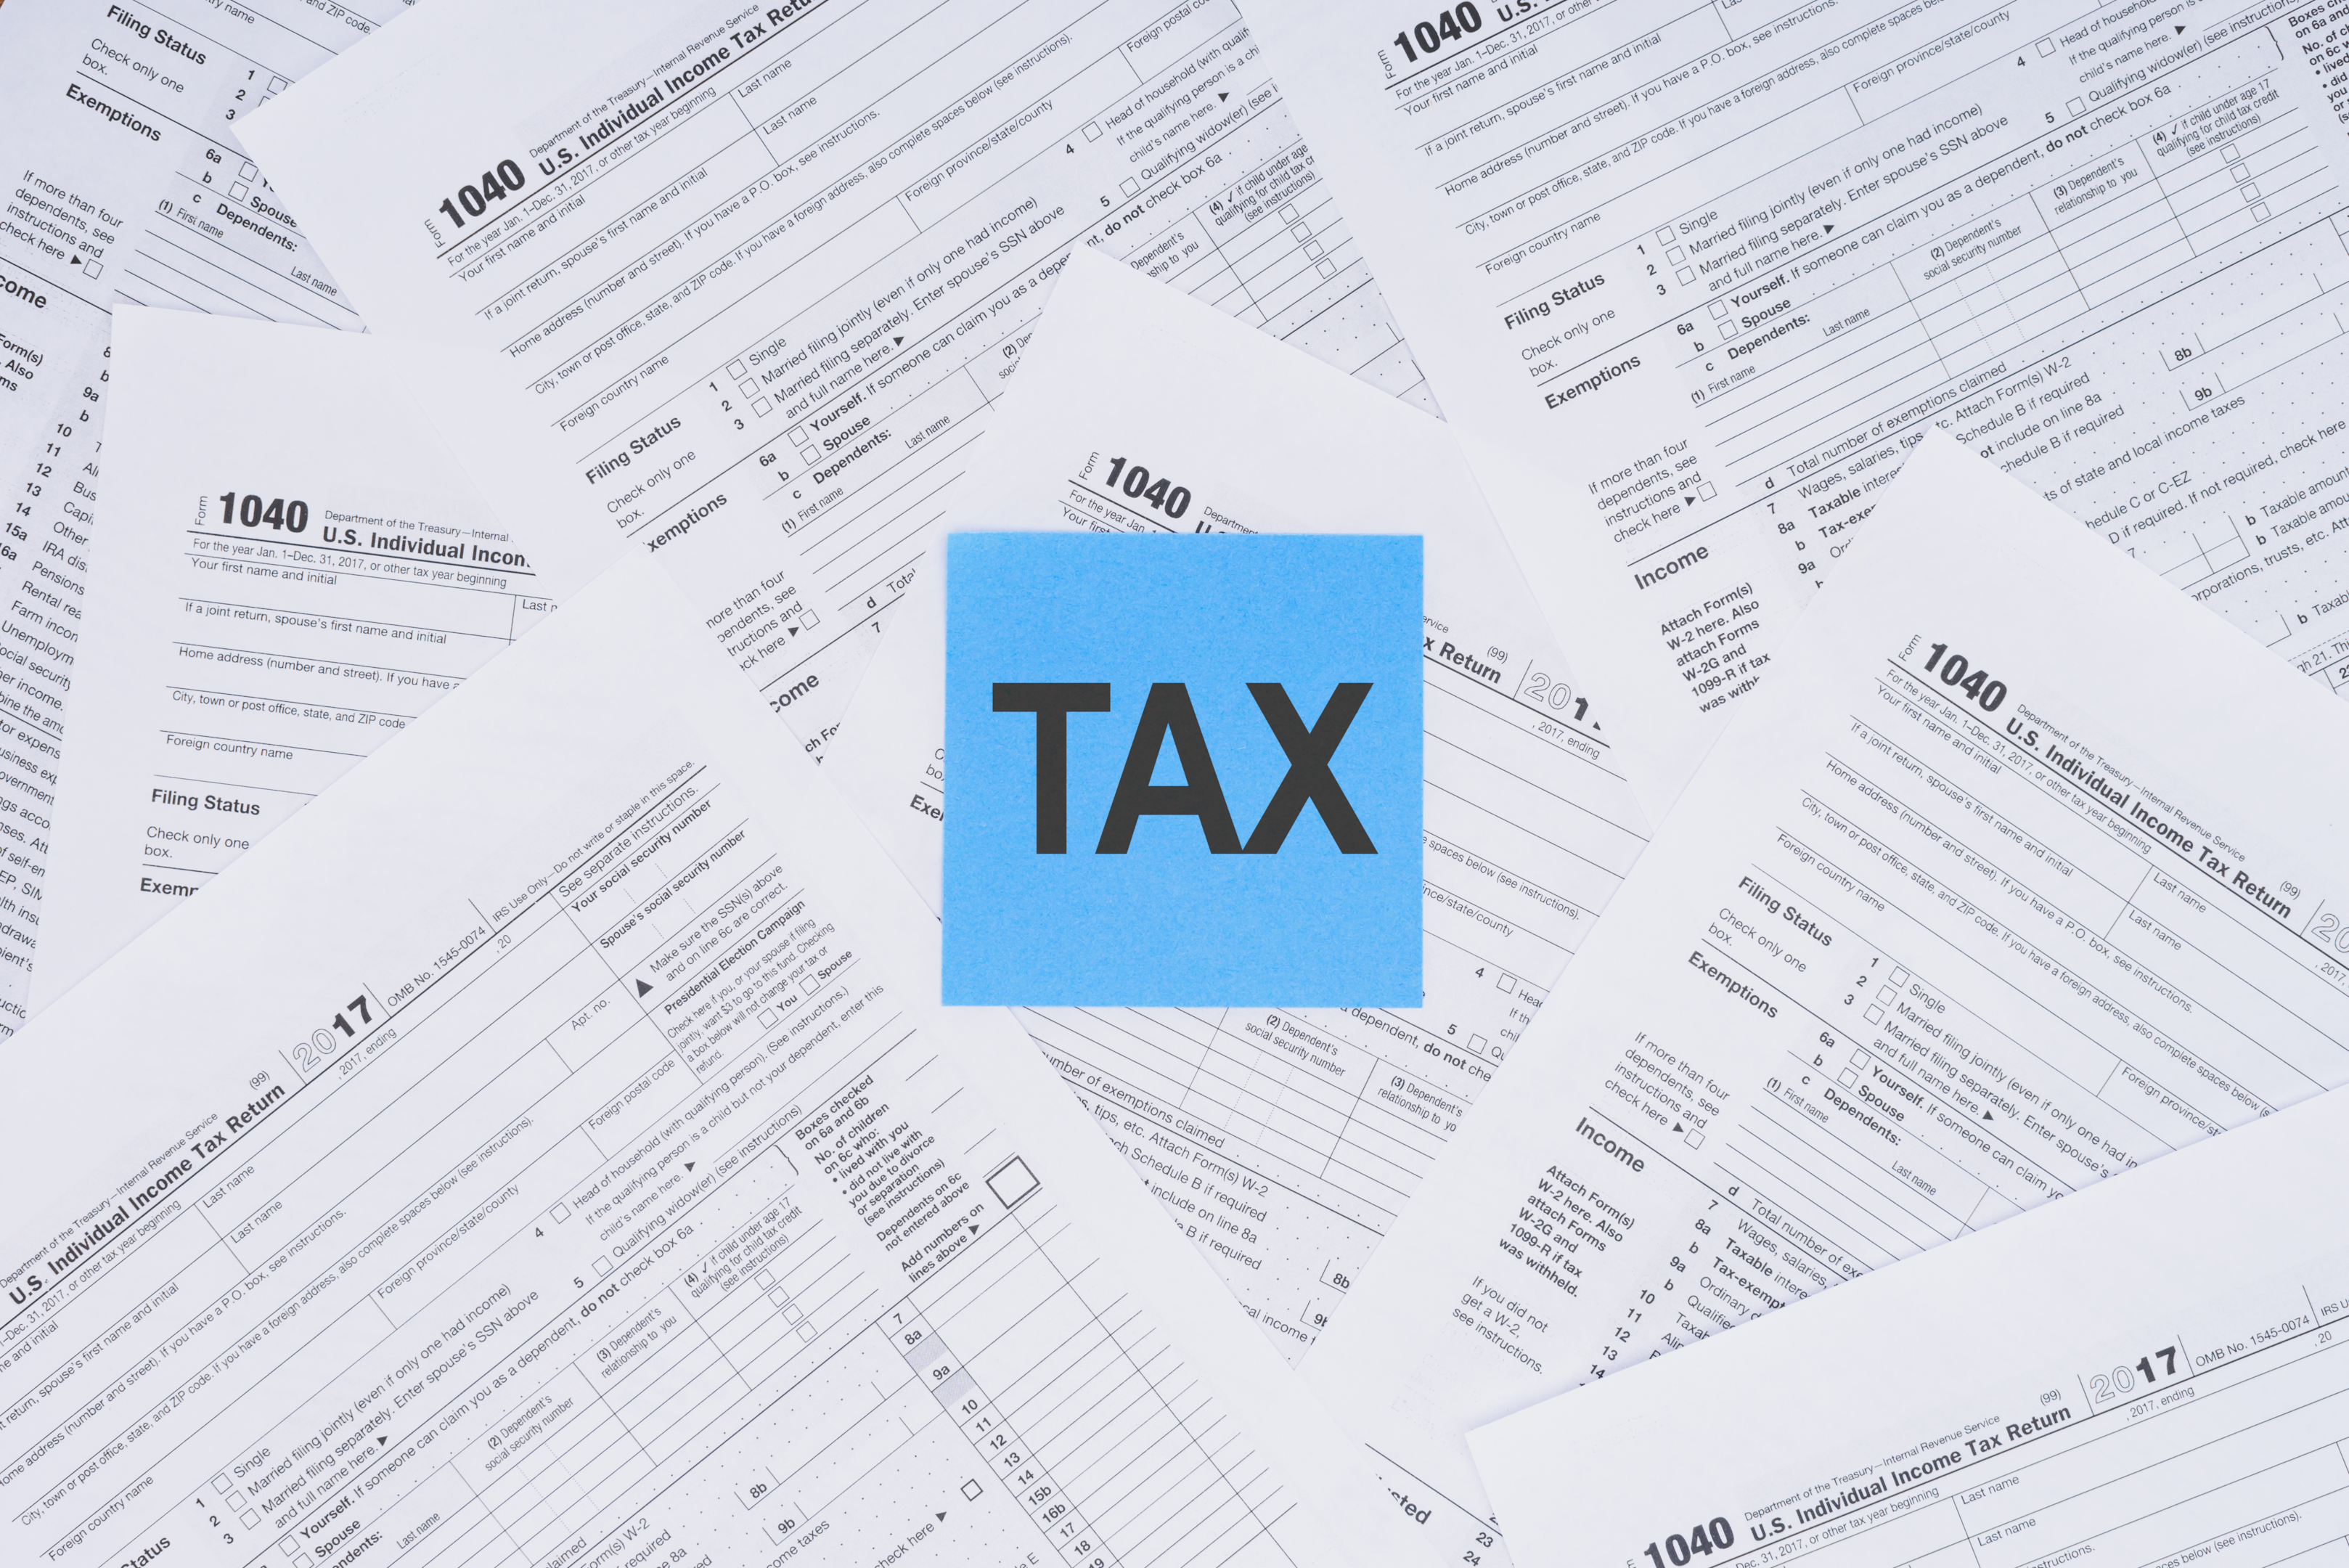 It's best to seek help from tax experts when you can't navigate complicated tax situations